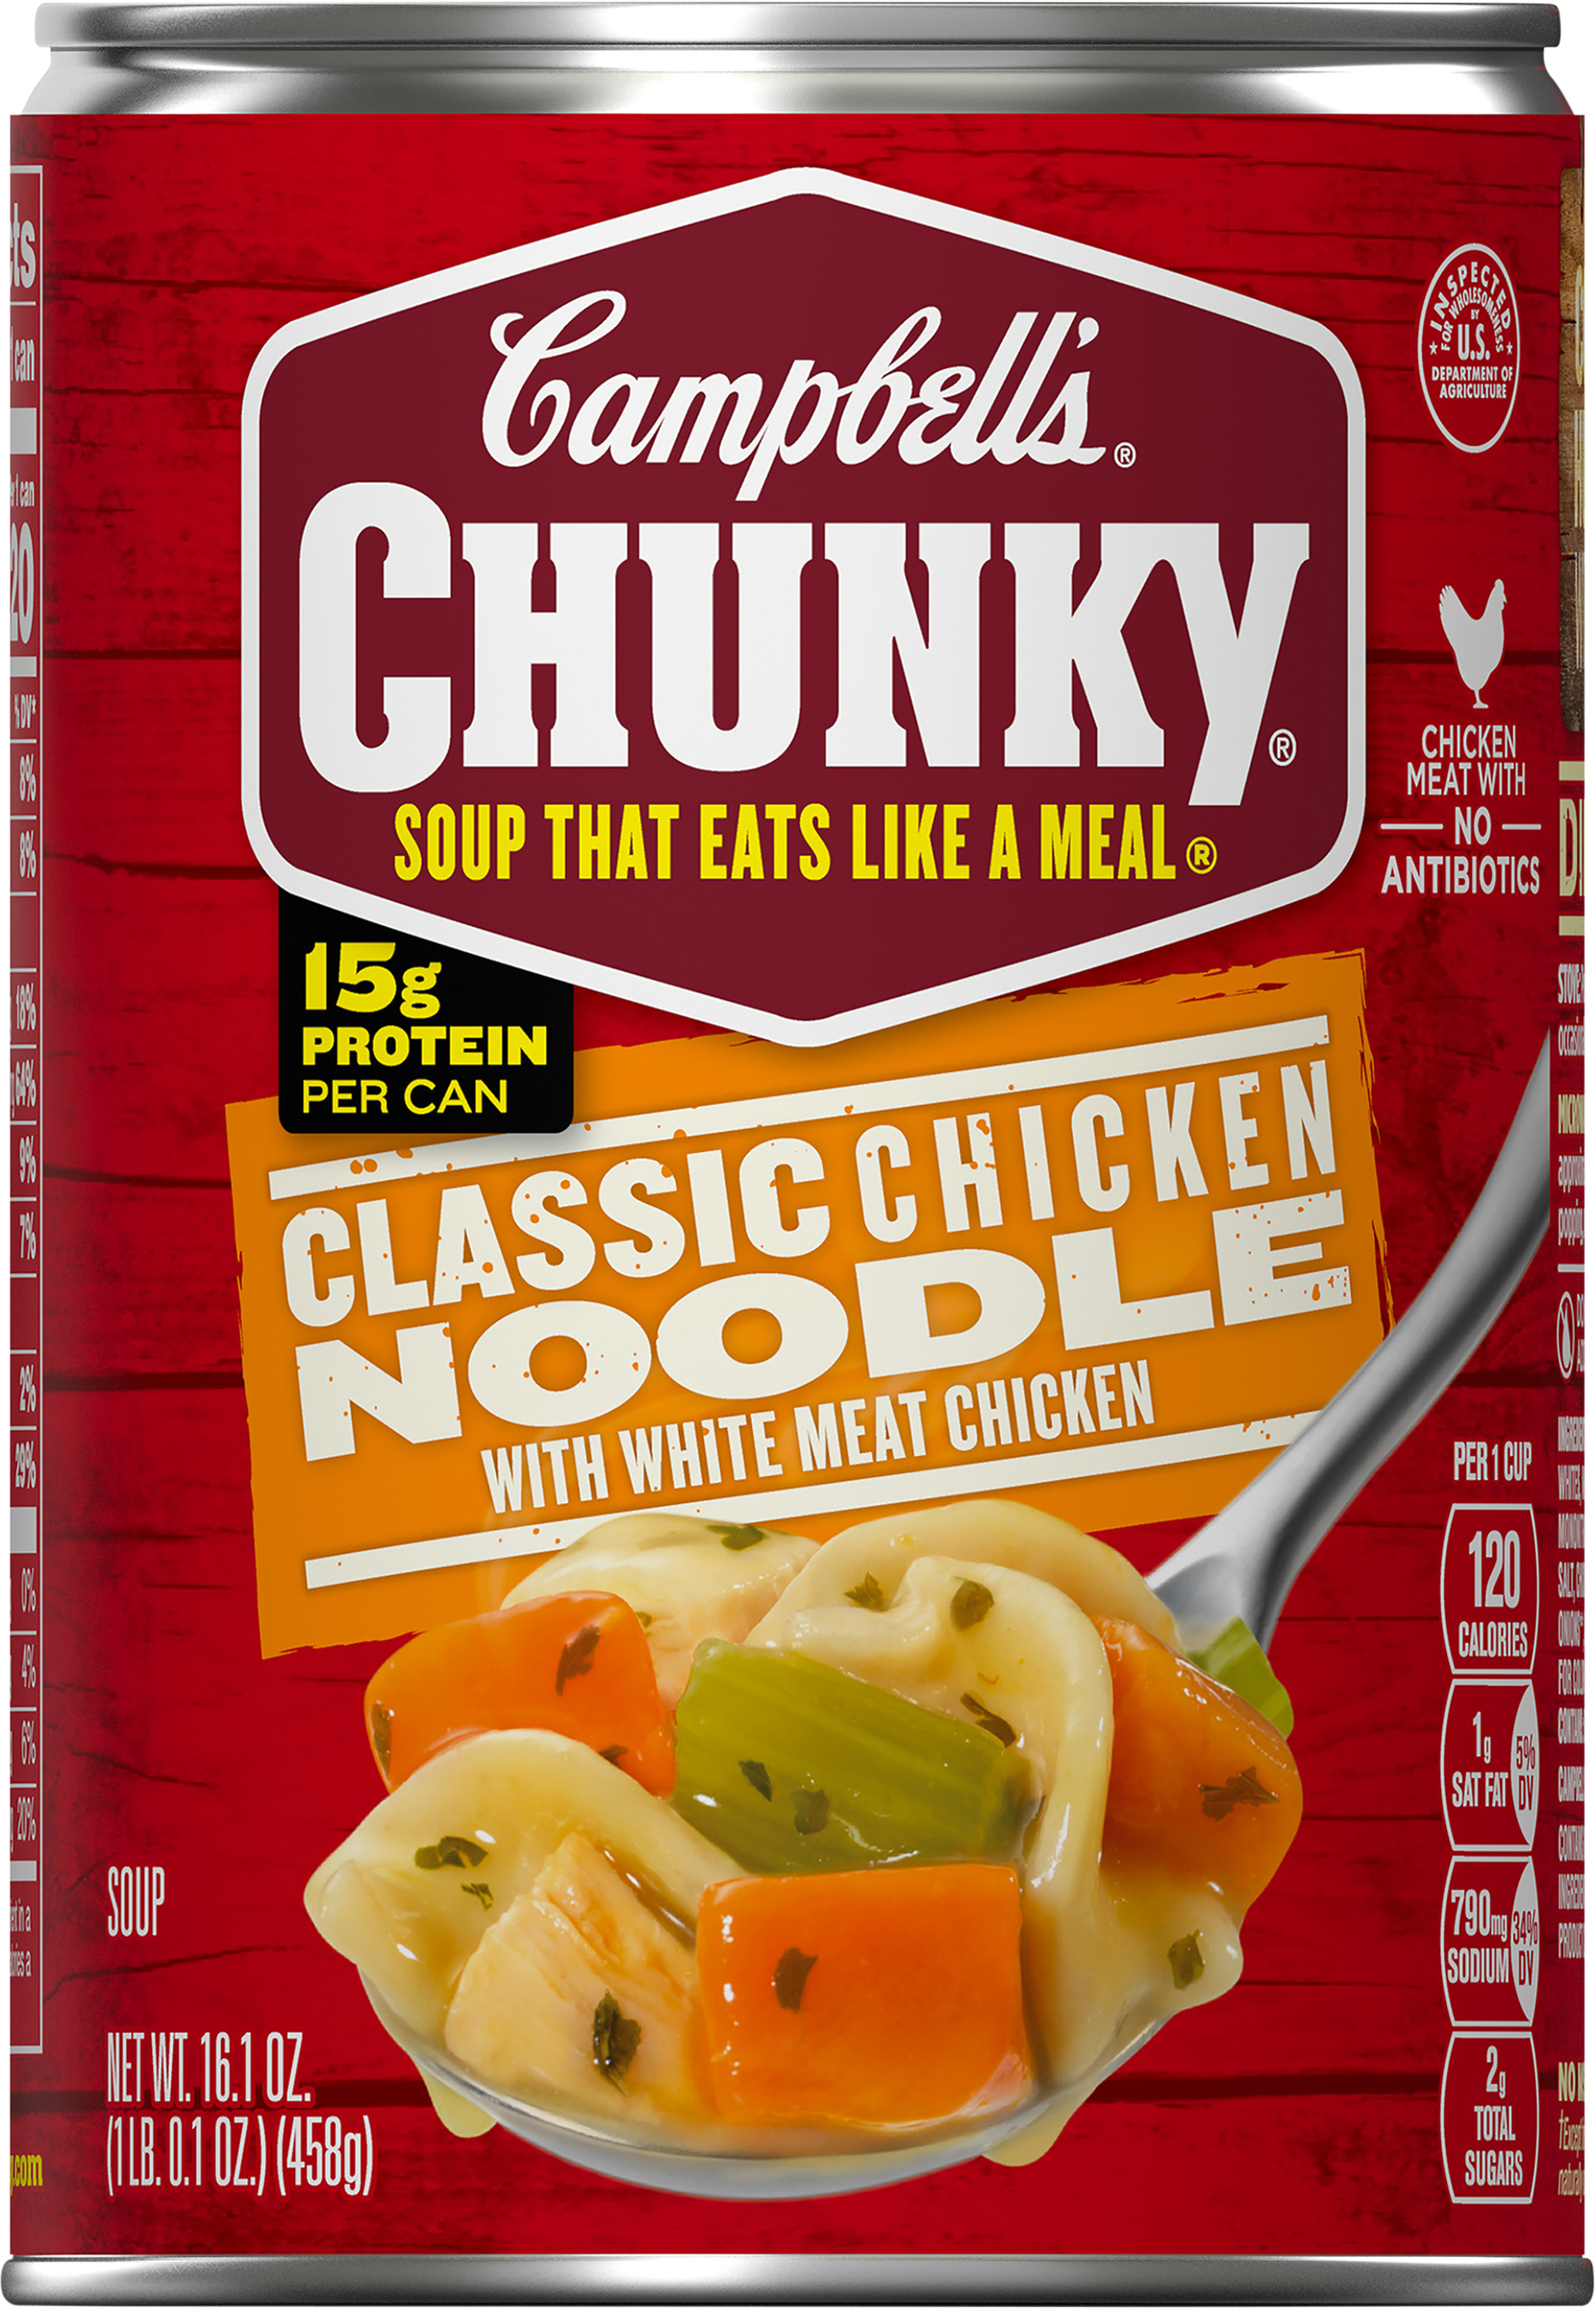 Campbell's Chunky Classic Chicken Noodle Soup 16.1 oz